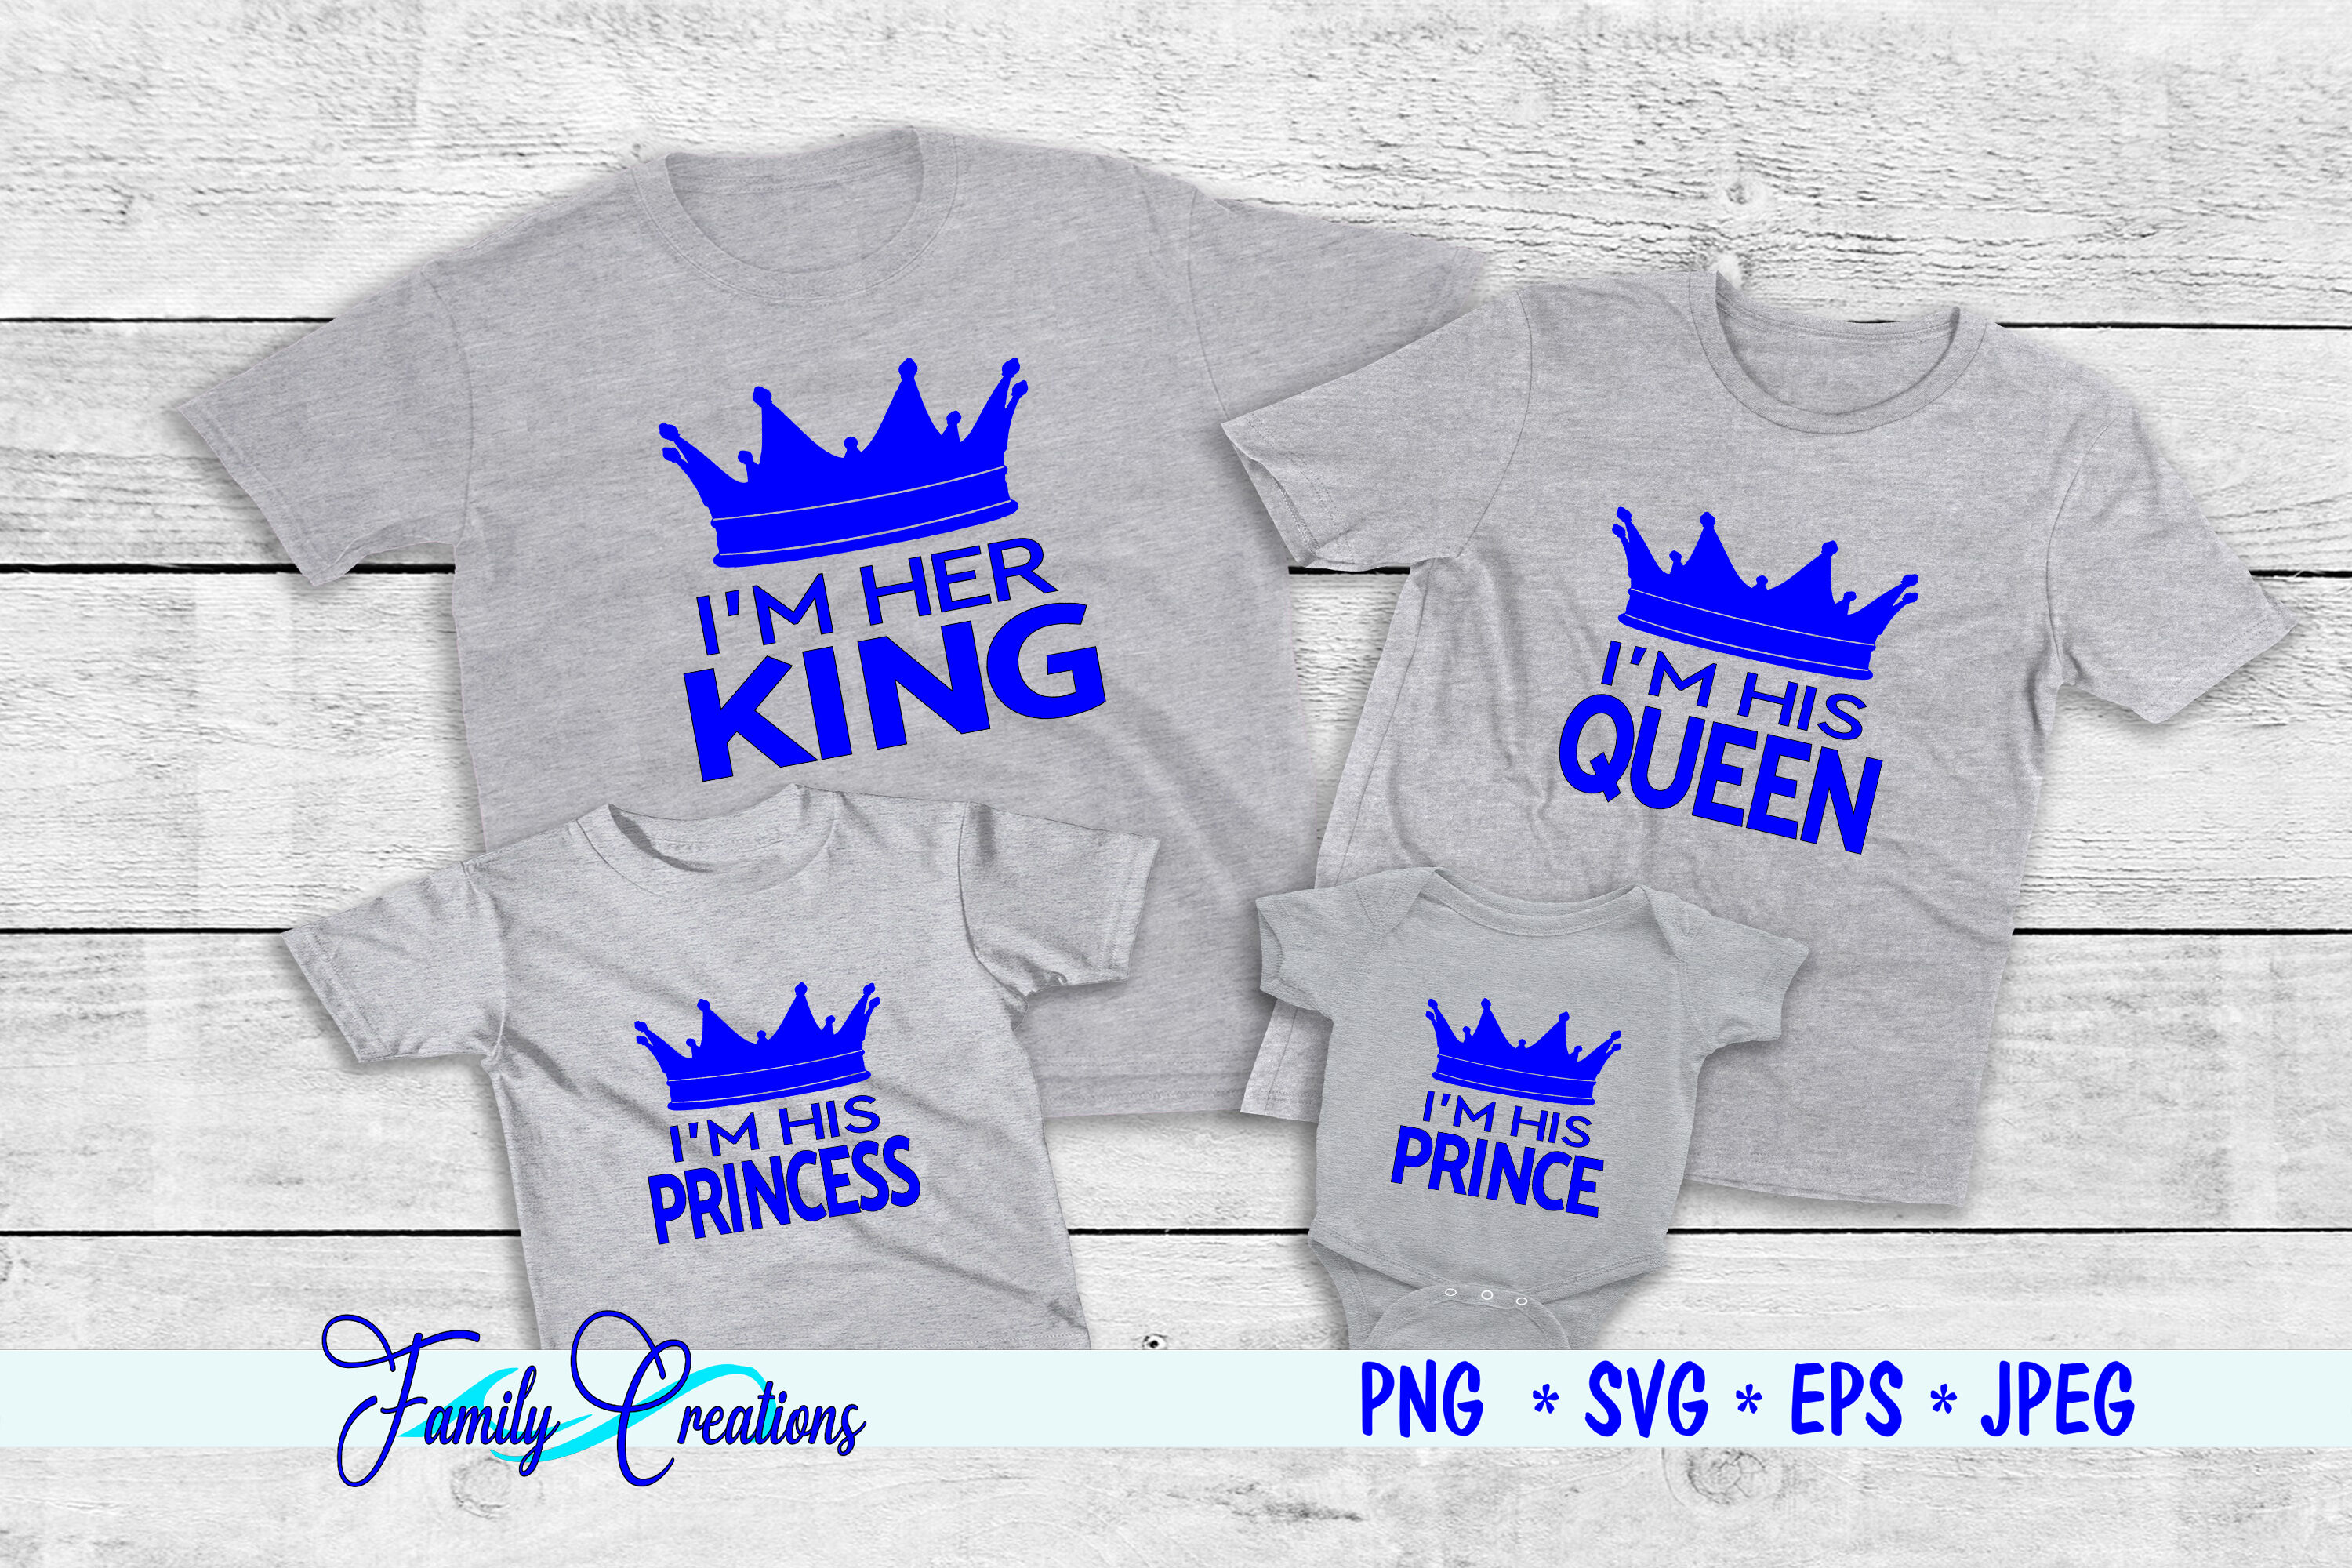 His Queen Her King Fairy Tale LL007 C SVG DXF Fcm Ai Eps Png Jpg Digital file for Commercial and Personal Use